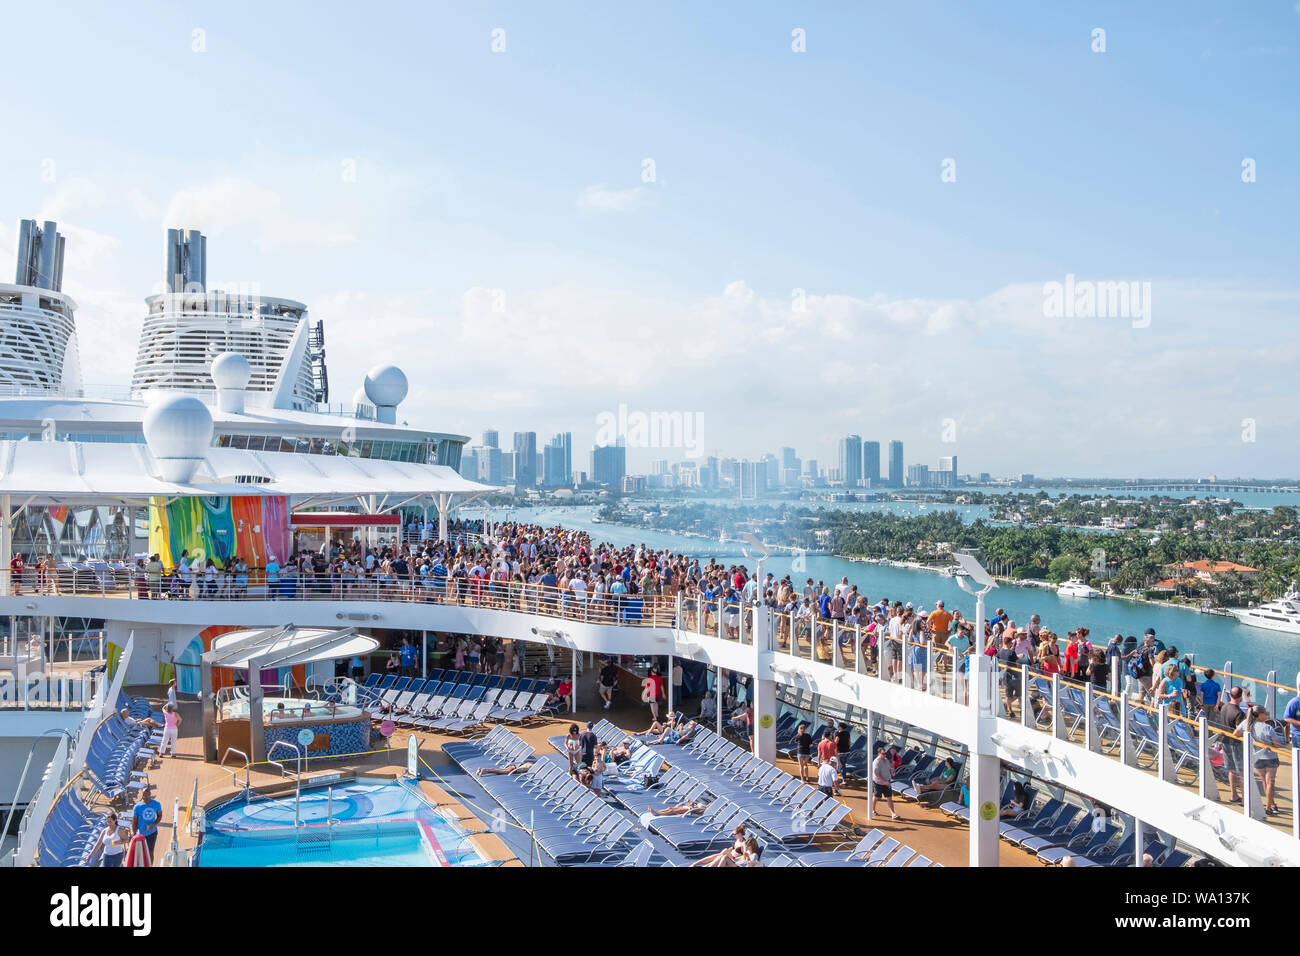 It’s a mess when the ship leaves Miami. Here, on the last deck, some 4000 passengers are gathered. The Symphony of the seas is 18 decks, 2775 rooms, 2 Stock Photo